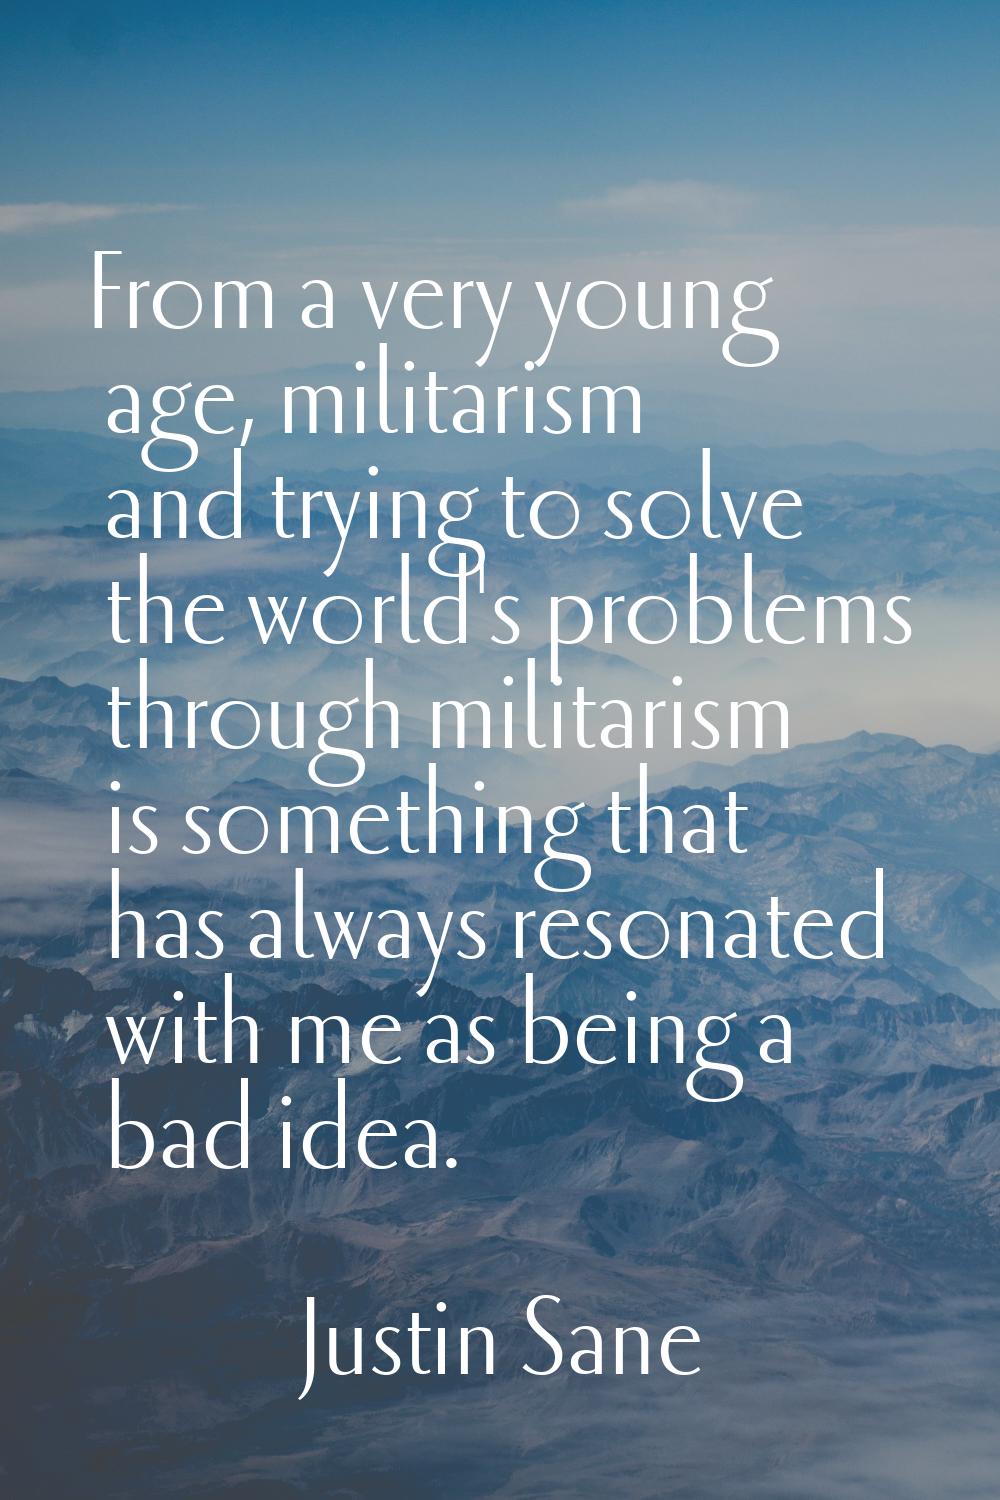 From a very young age, militarism and trying to solve the world's problems through militarism is so